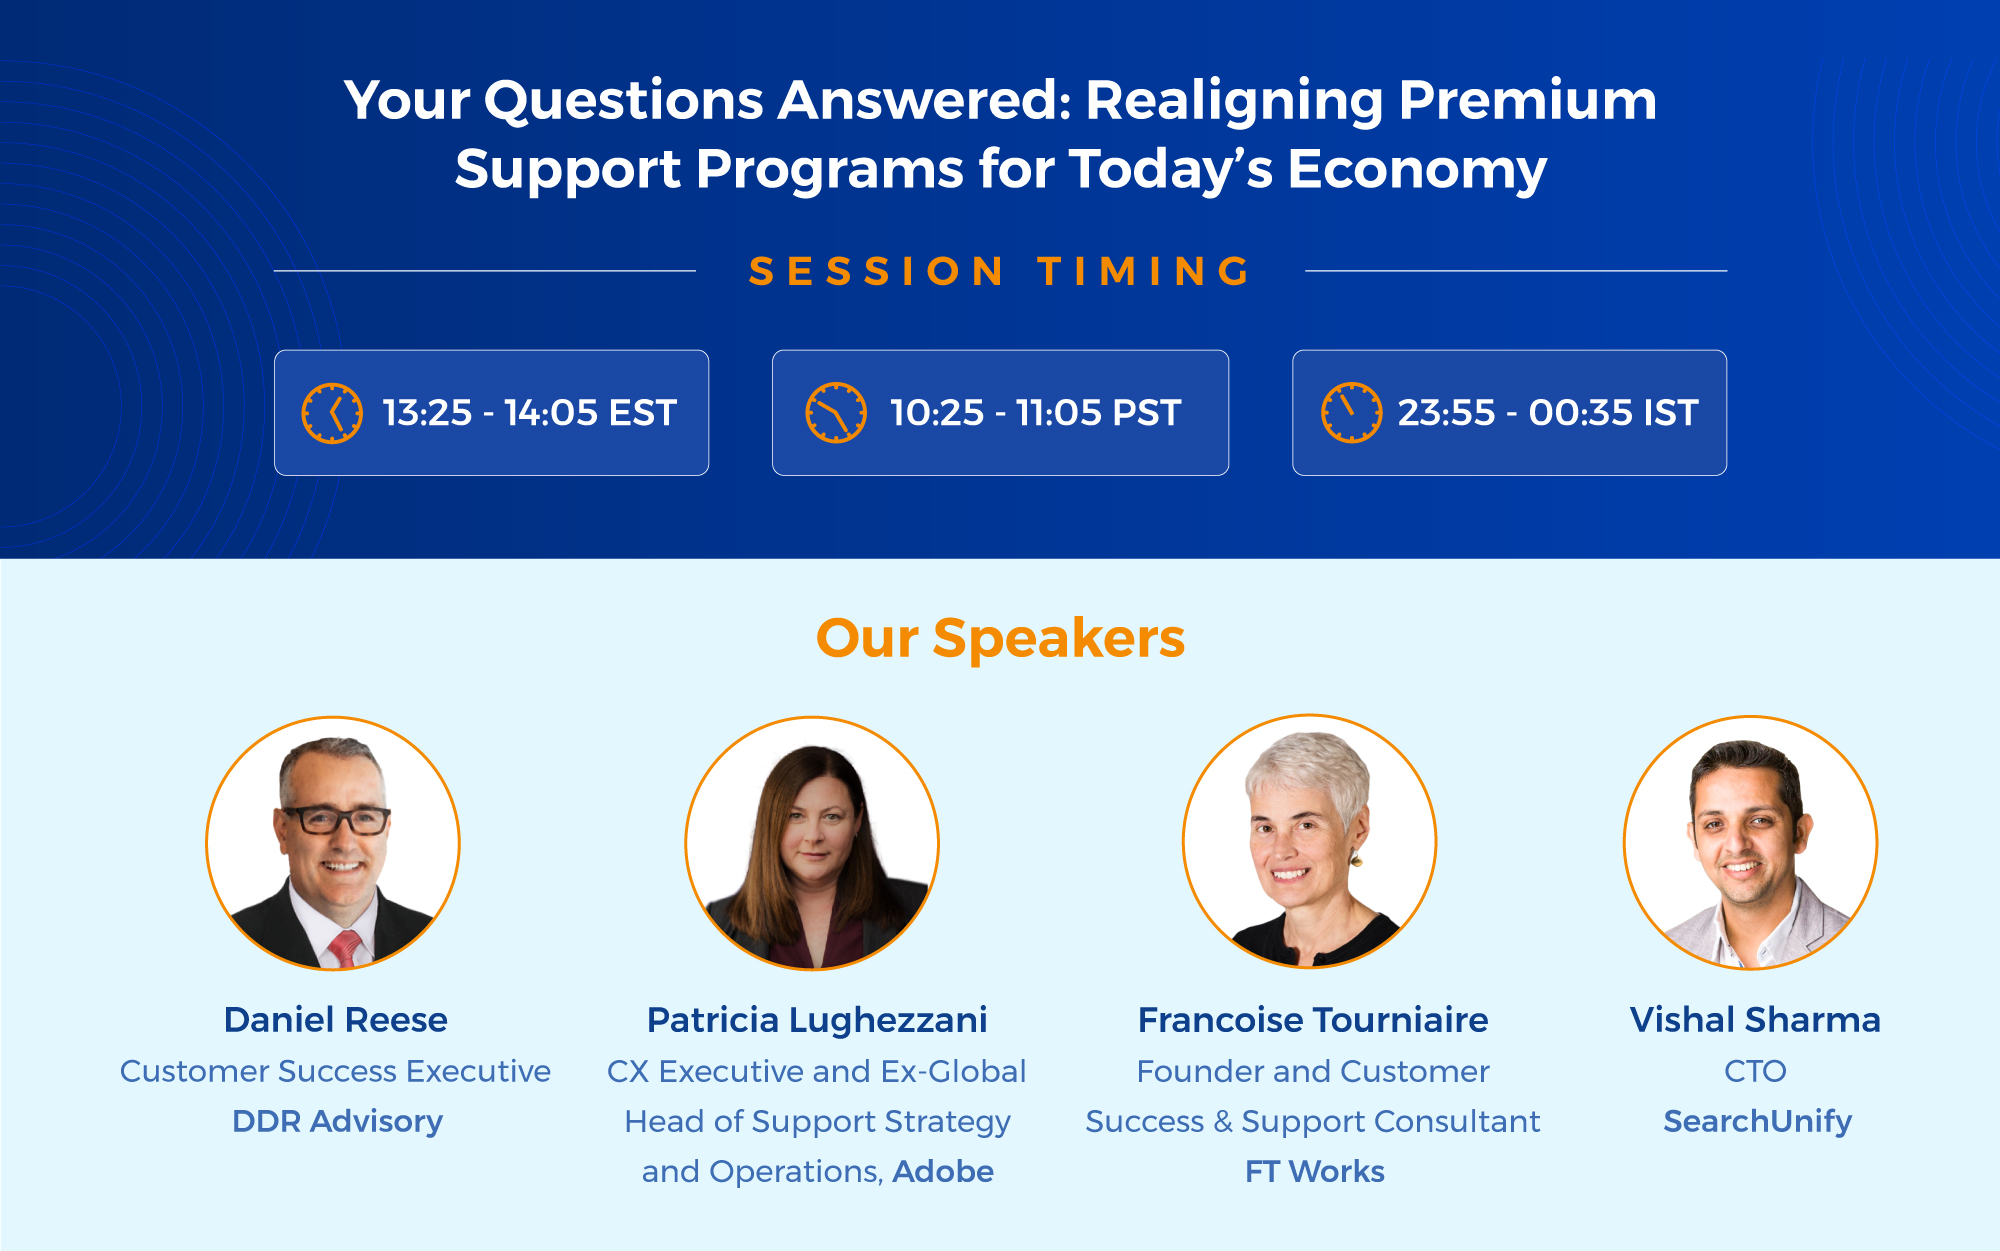 Your Questions Answered: Realigning Premium Support Programs for Today’s Economy